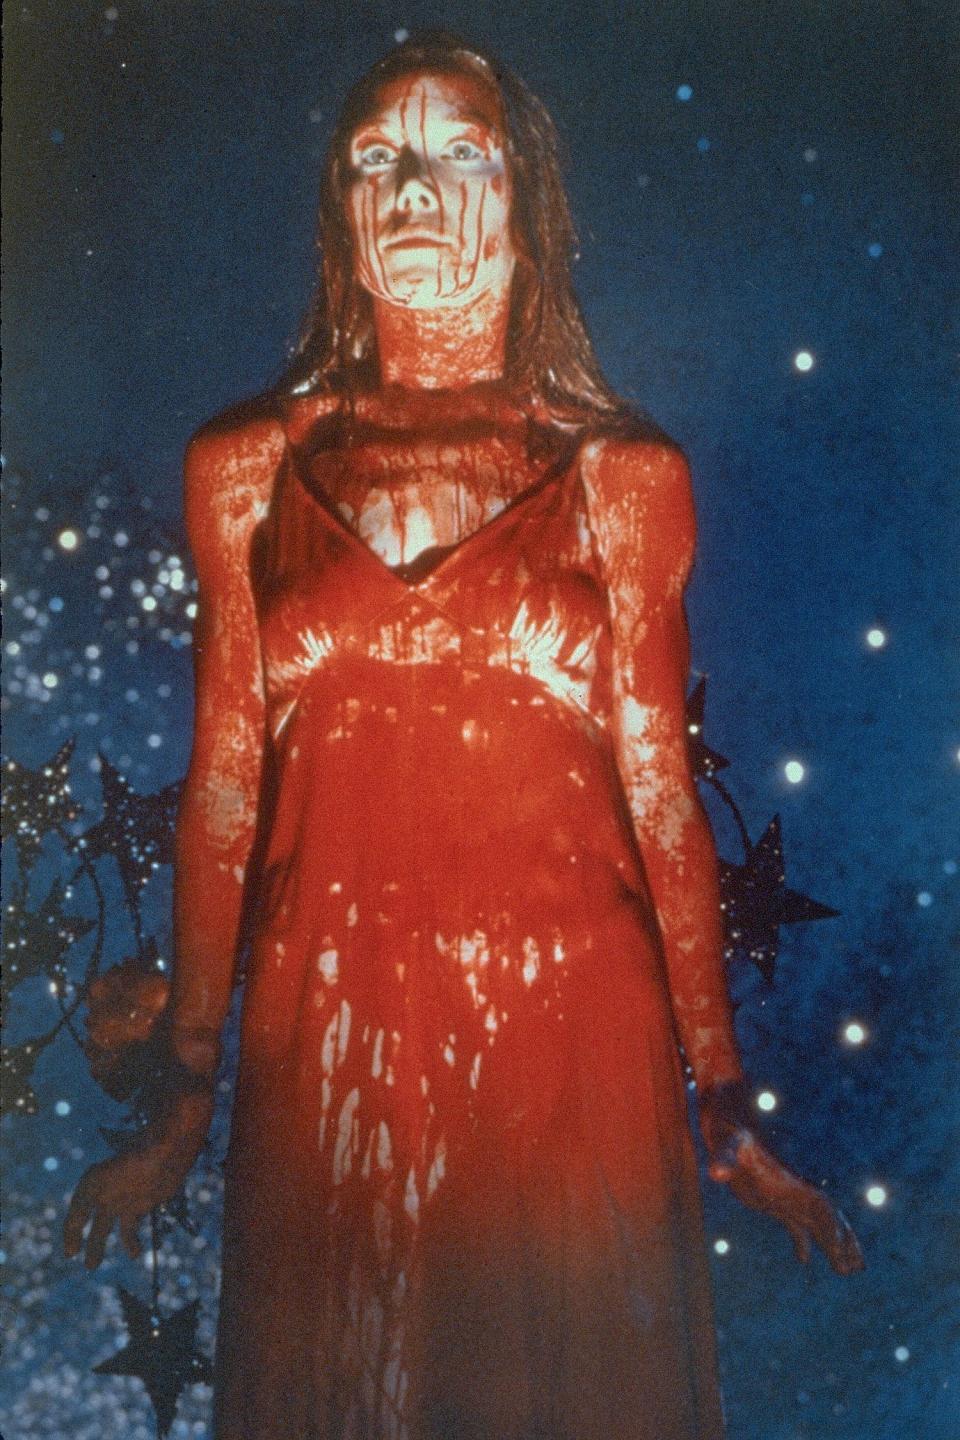 Sissy Spacek's teenage title character gets drenched in pig's blood and goes berzerk in "Carrie."